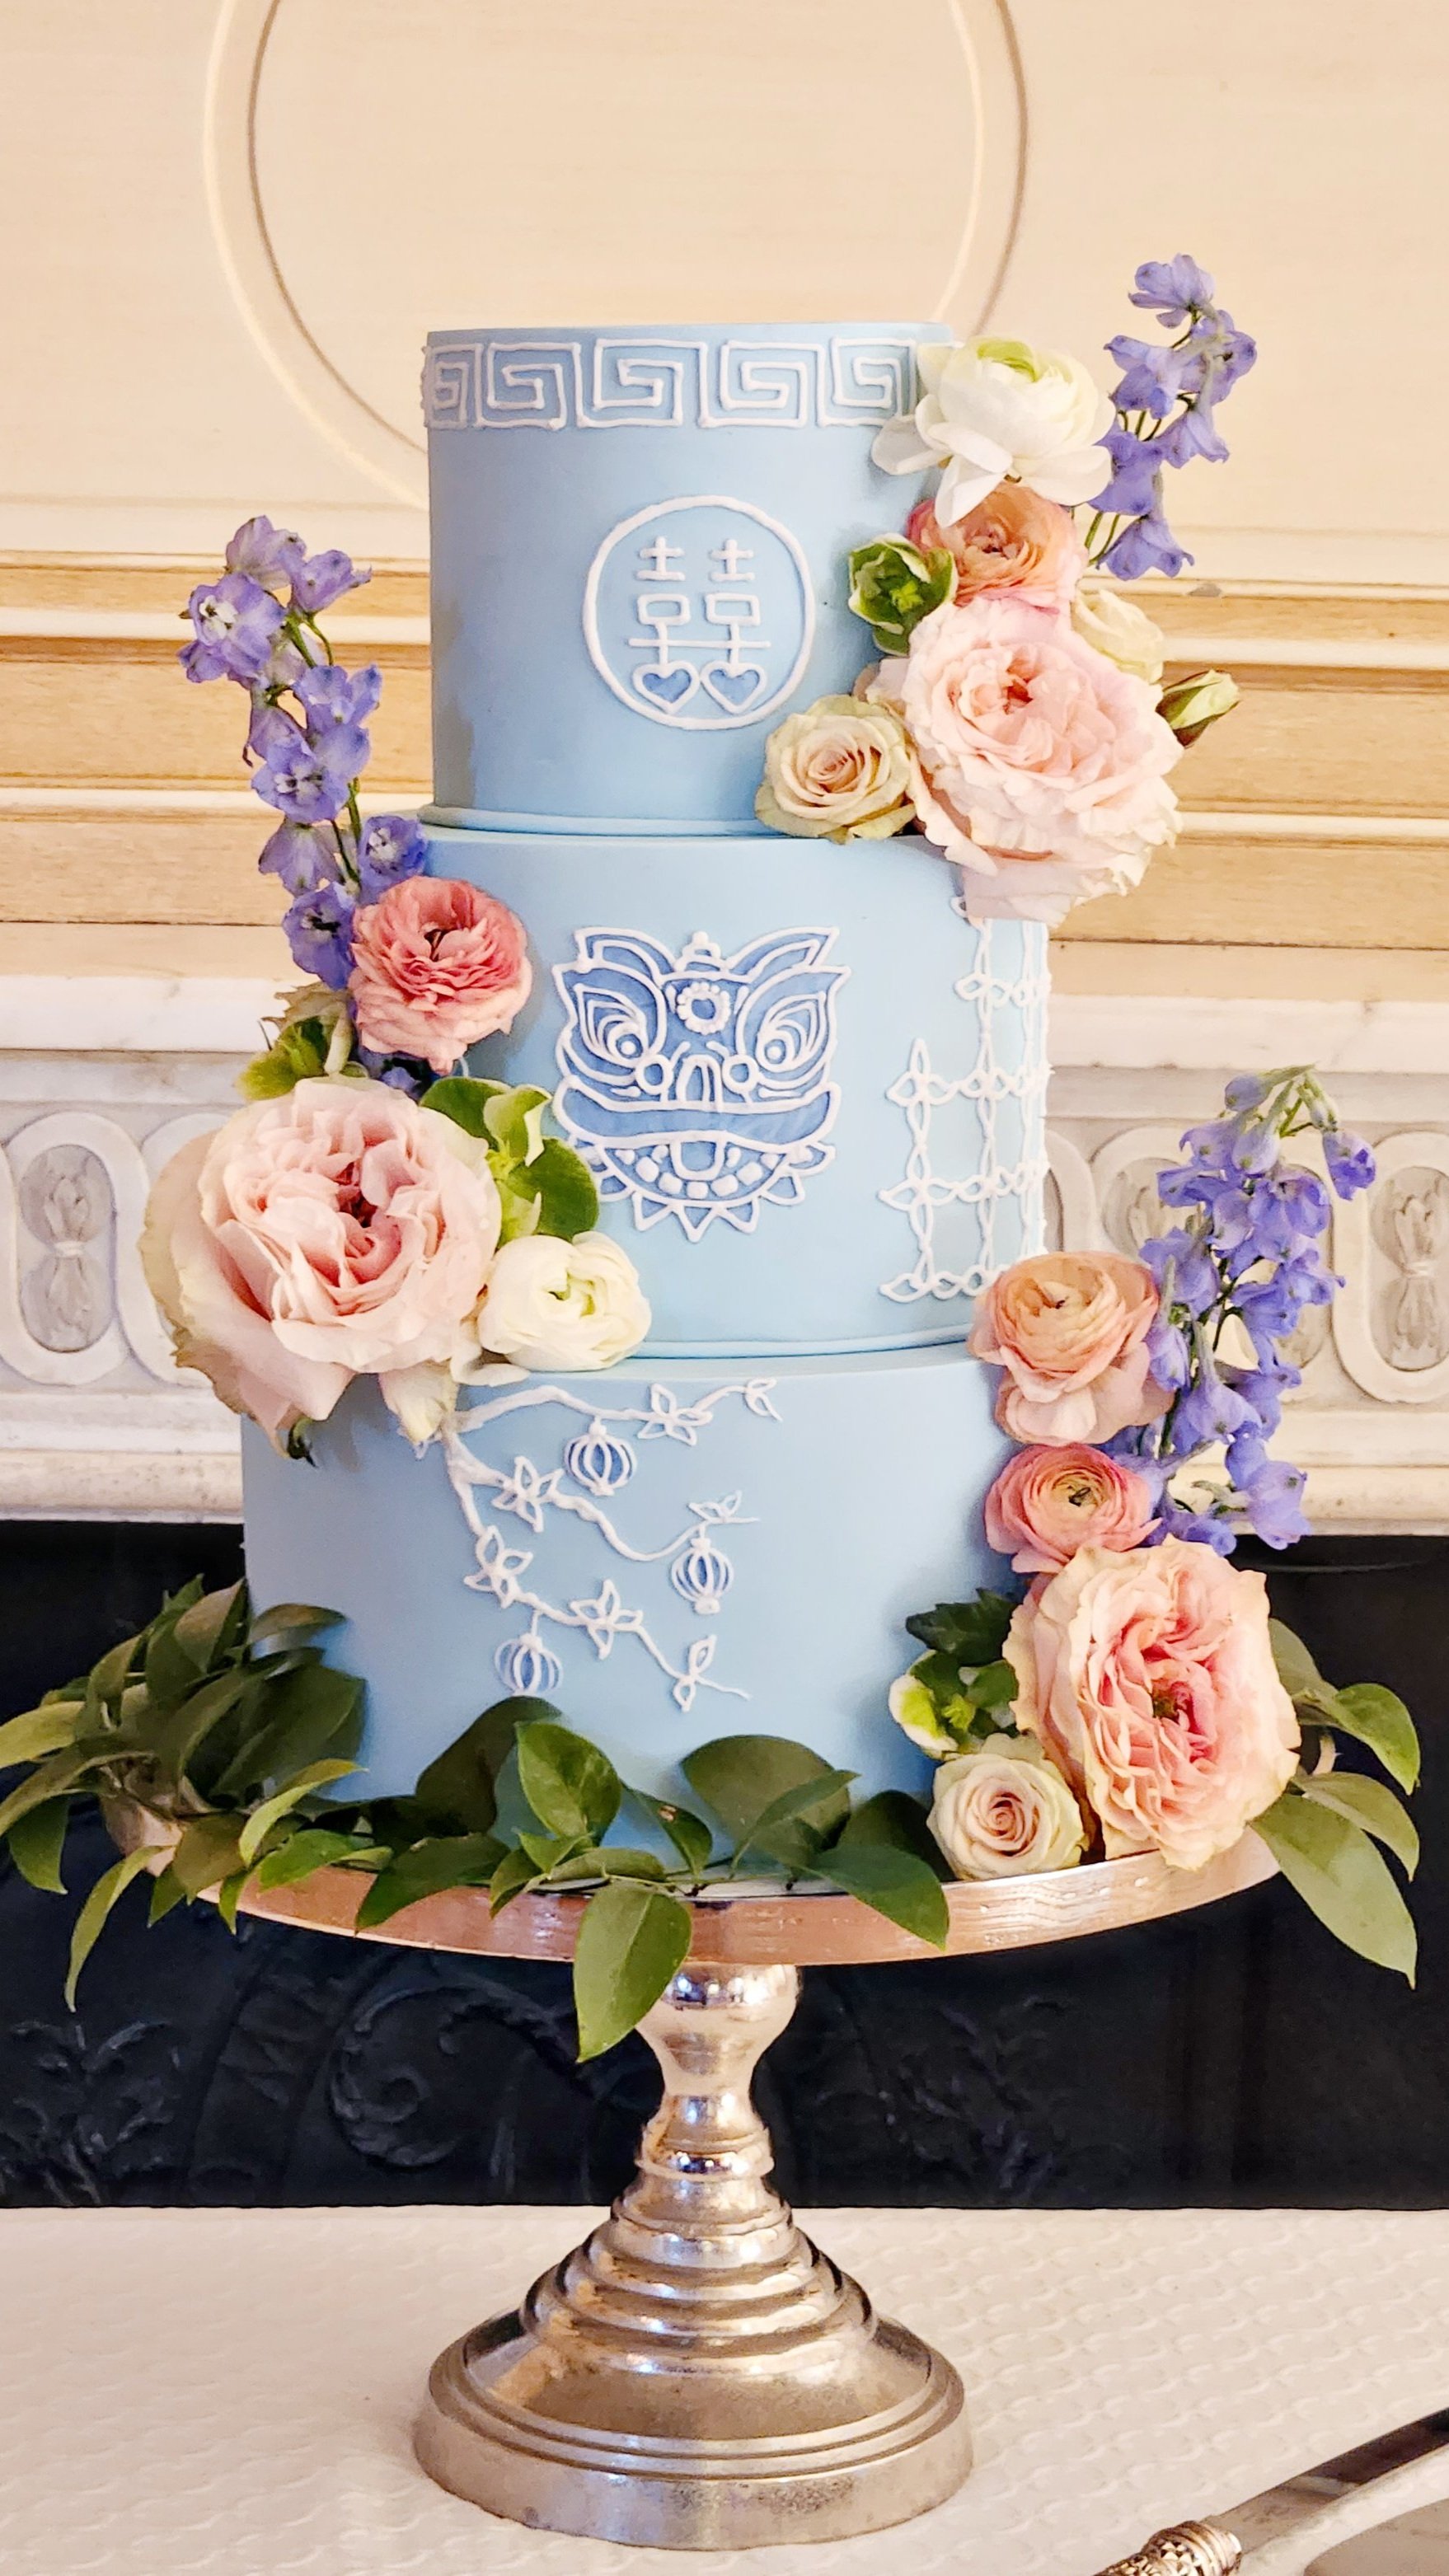 chinese+lion_double+happiness_wedding+cake_+Blue+Lace+Cakes+1.jpg